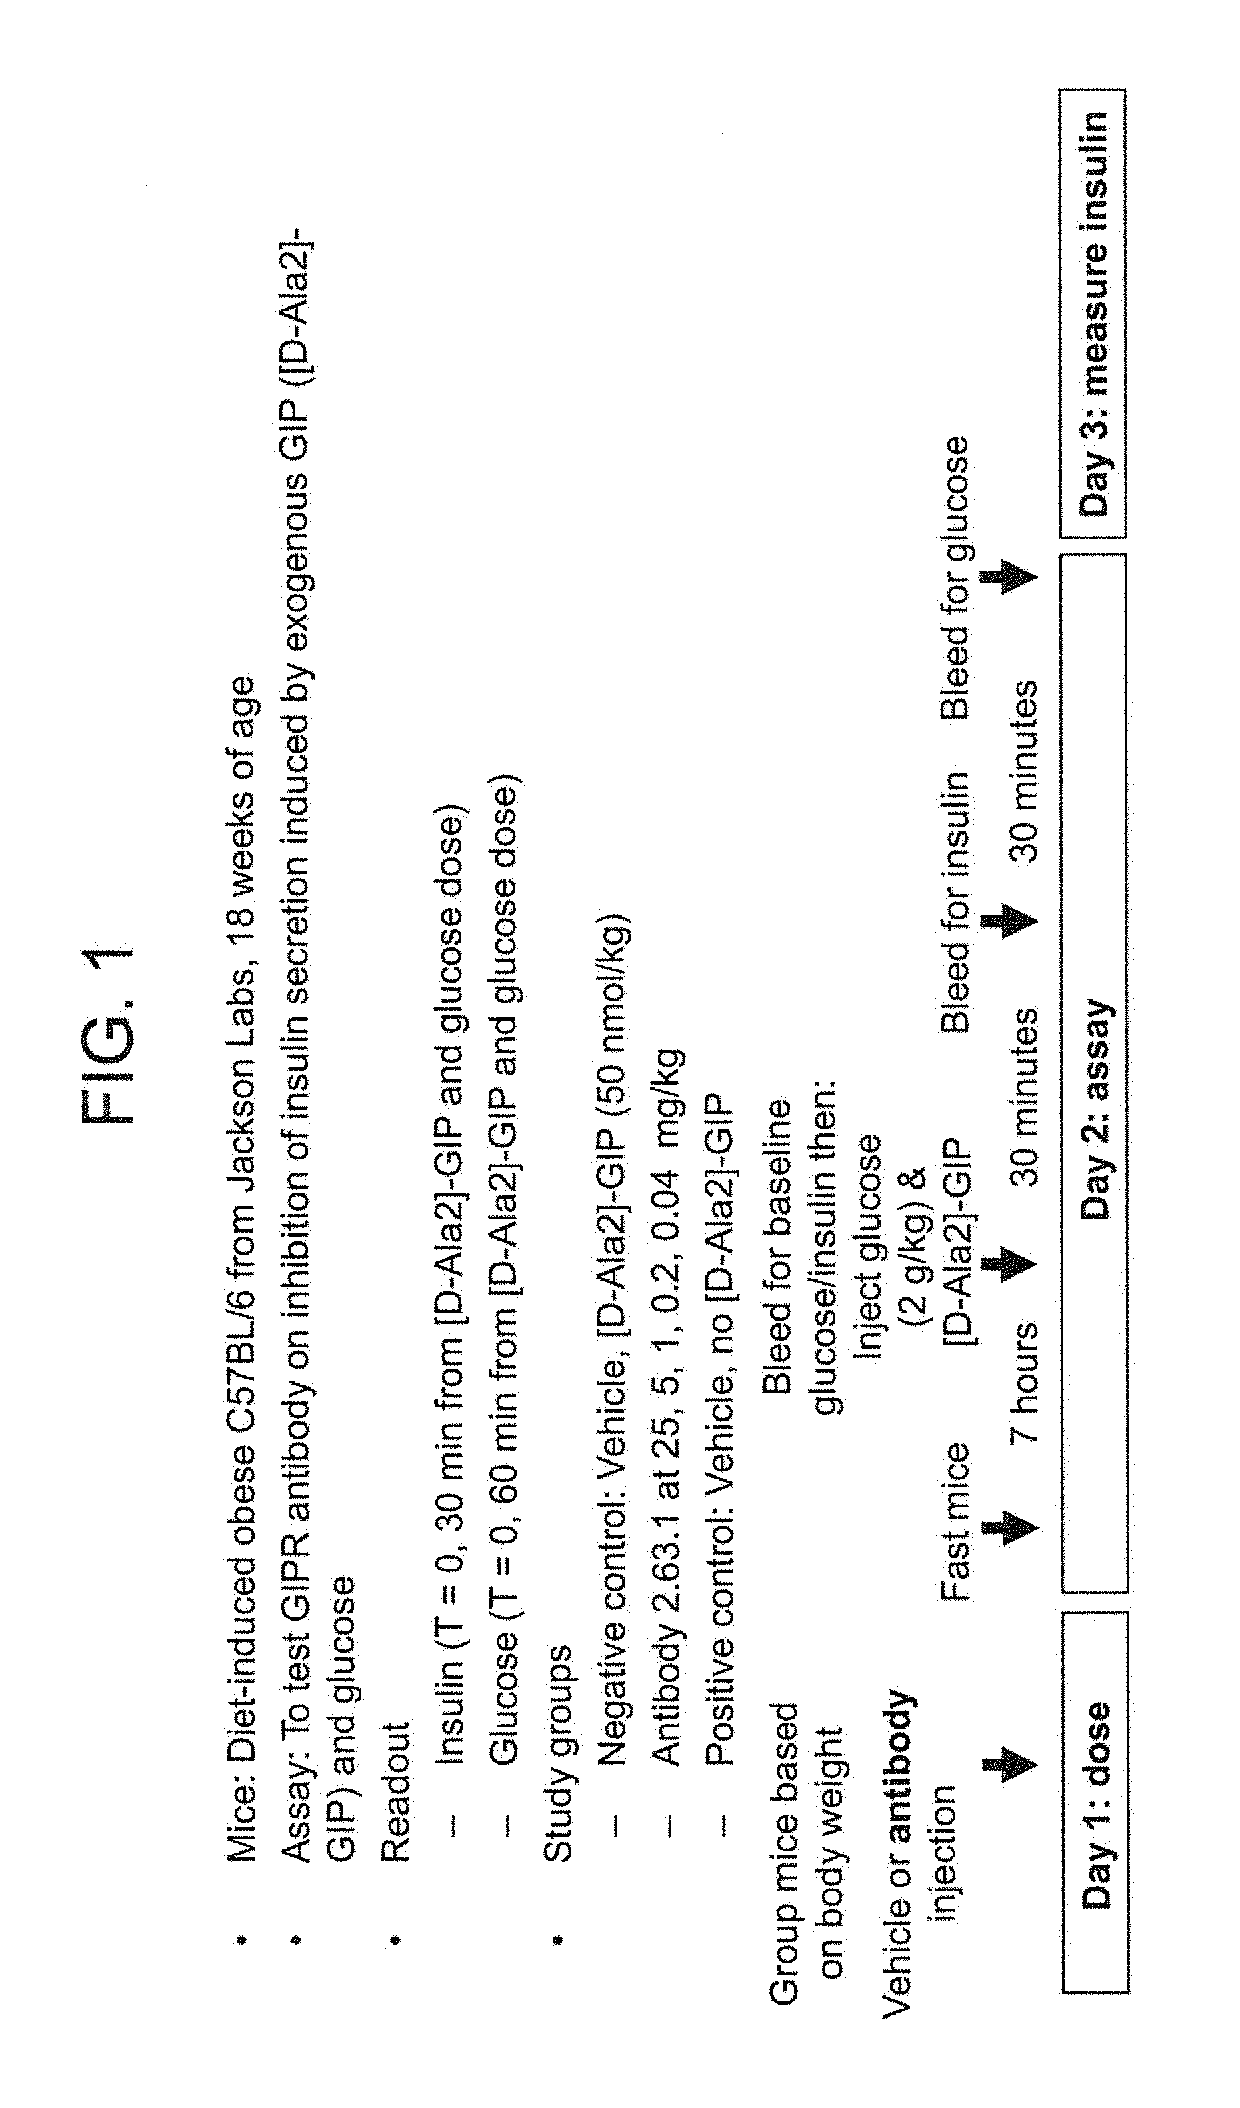 Method of treating or ameliorating metabolic disorders using binding proteins for gastric inhibitory peptide receptor (GIPR) in combination with GLP-1 agonists